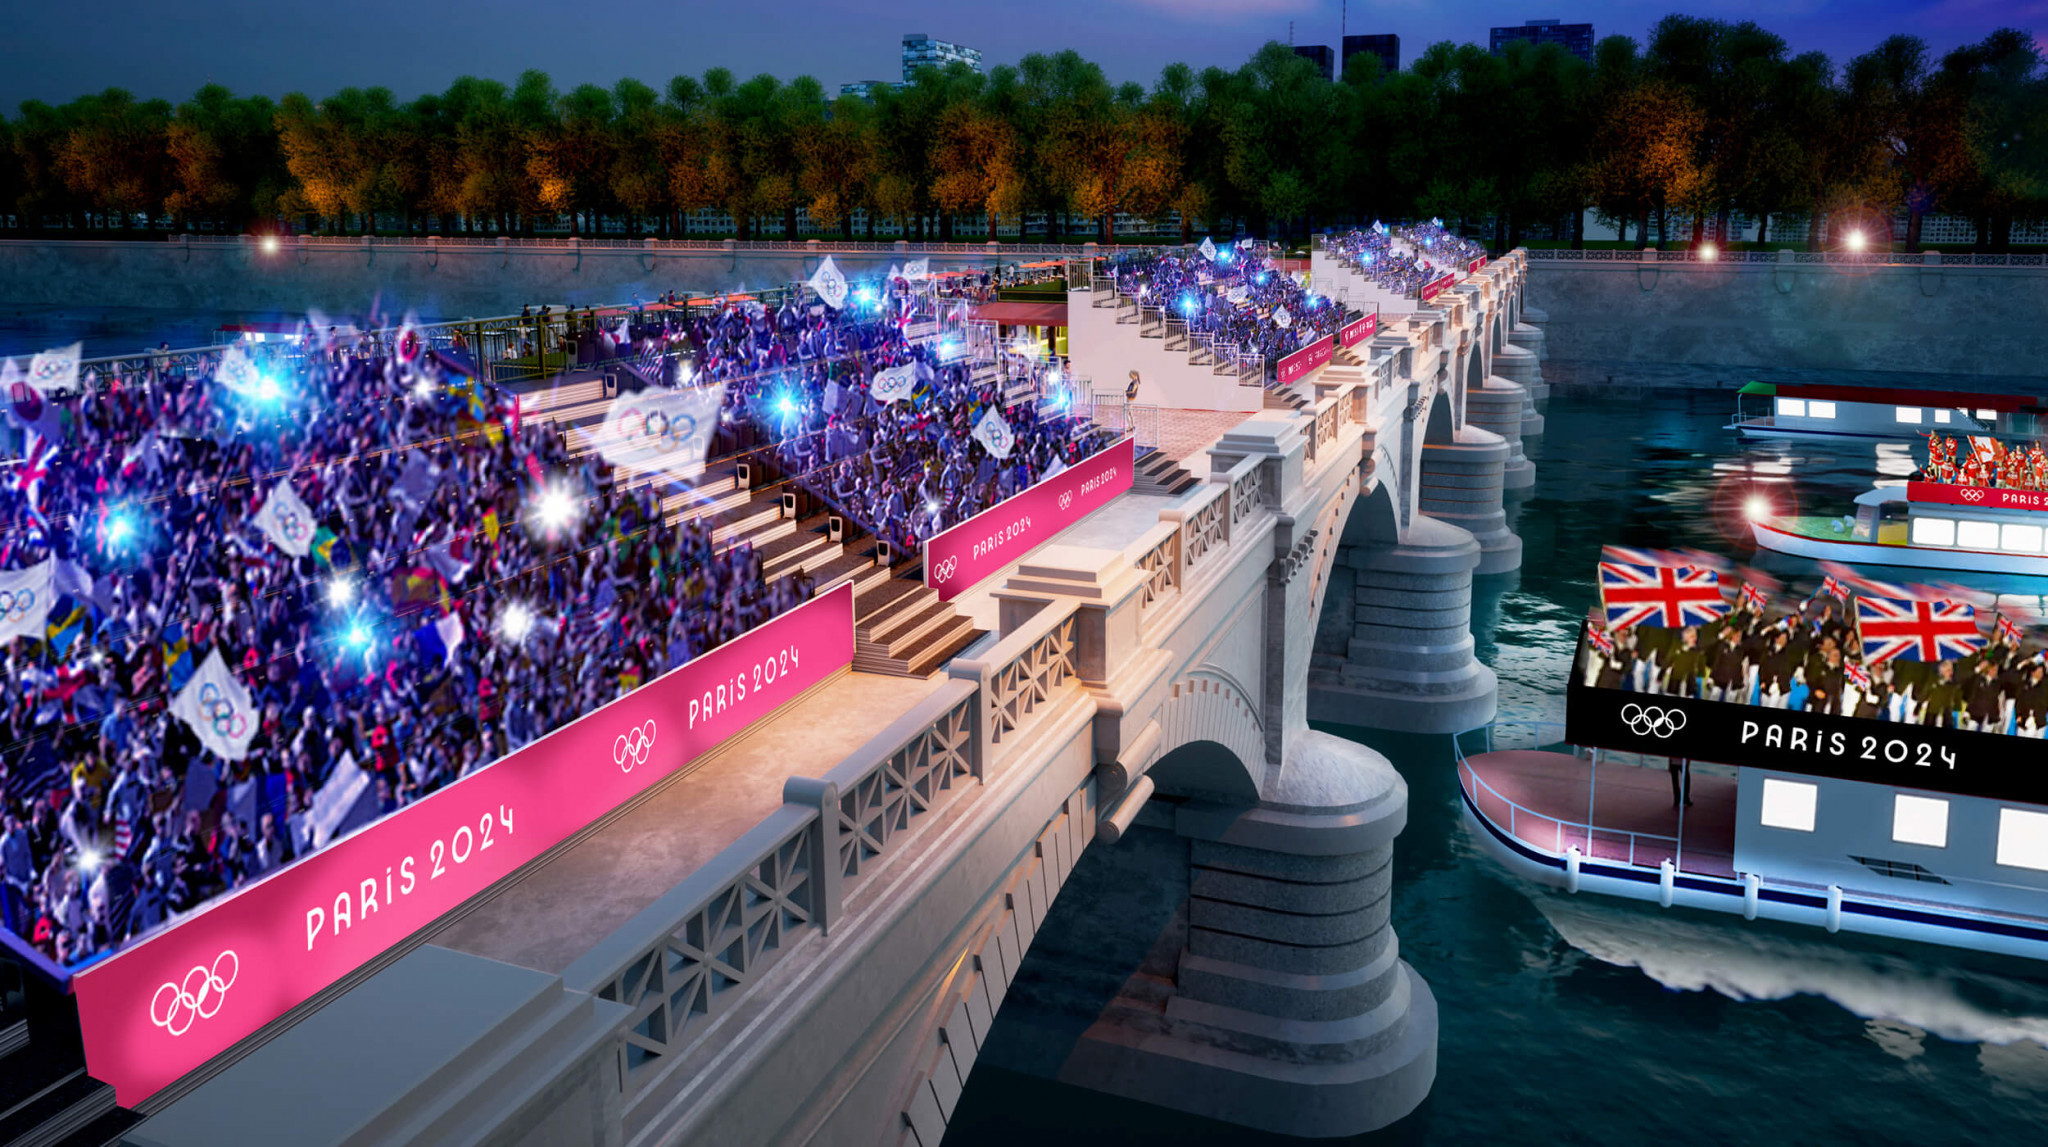 Premium tickets have been put on sale for hospitality areas on the bridges of the Seine during the Opening Ceremony ©Paris 2024